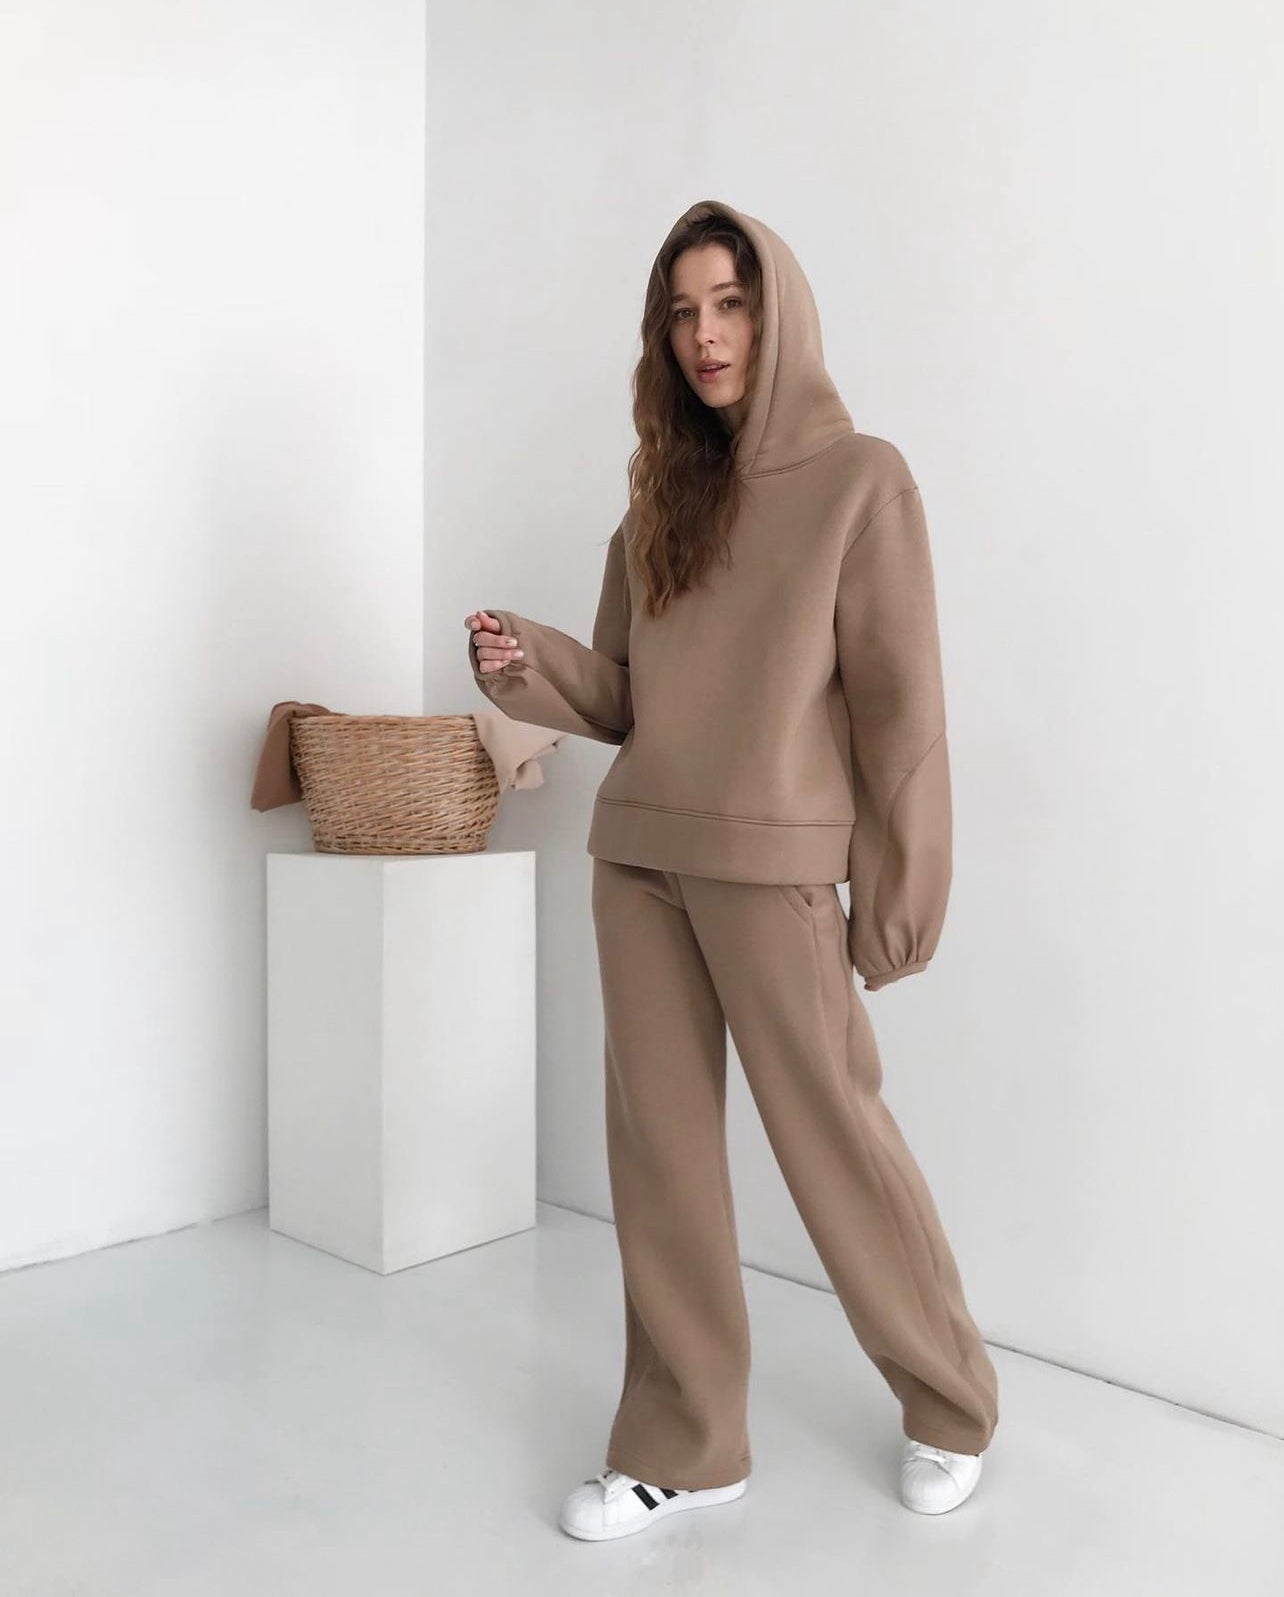 Fleece suit with eco leather details